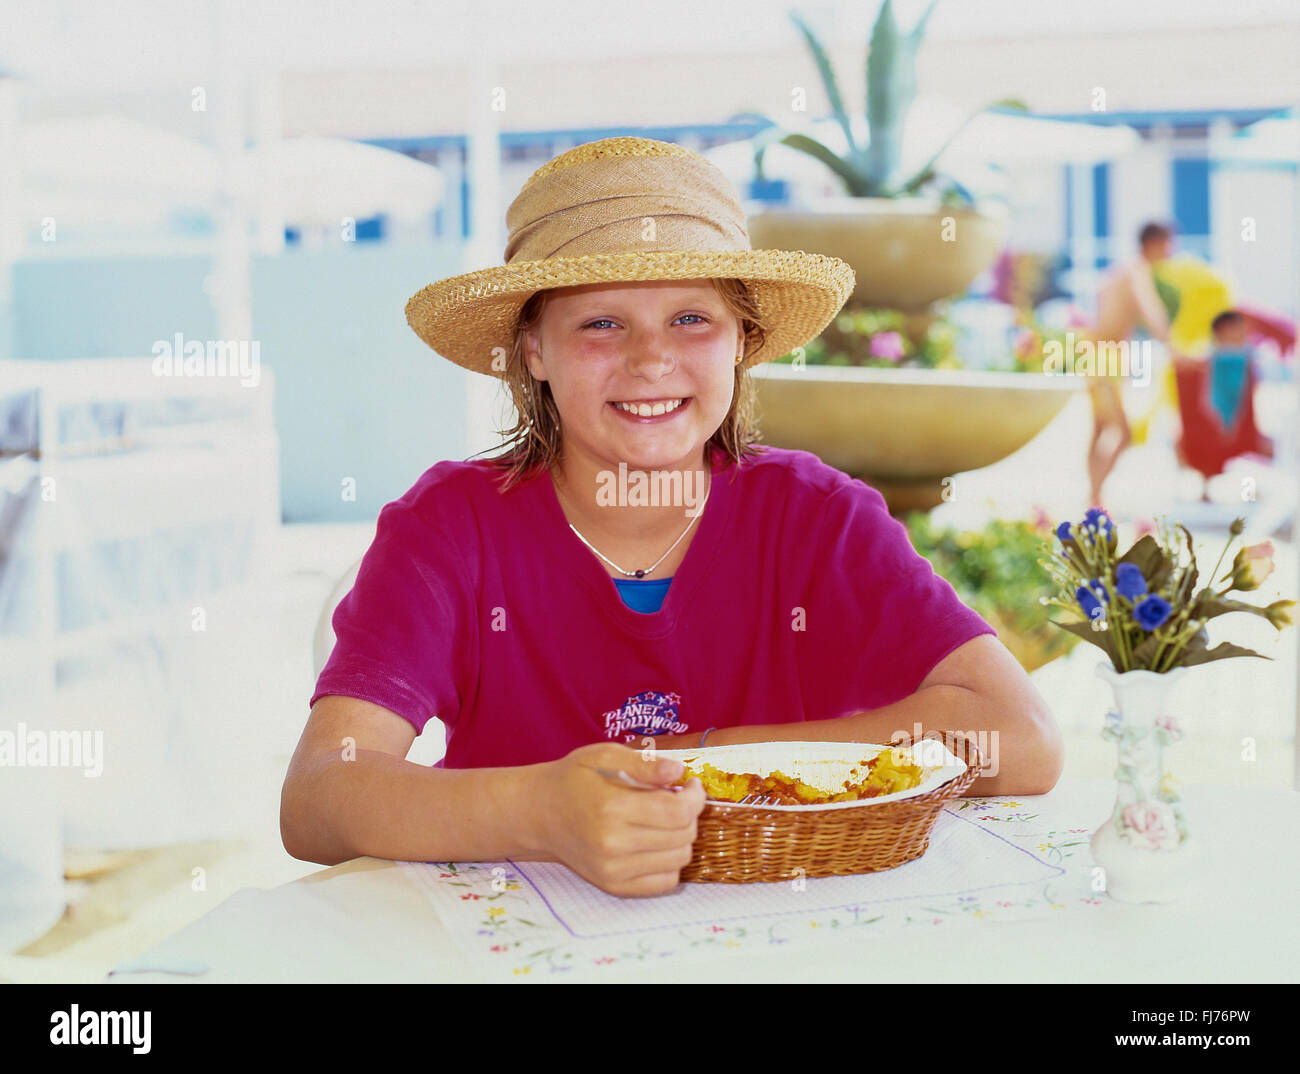 Young girl eating pasta in restaurant, Forte Dei Marmi, Province of Lucca, Tuscany Region, Italy Stock Photo